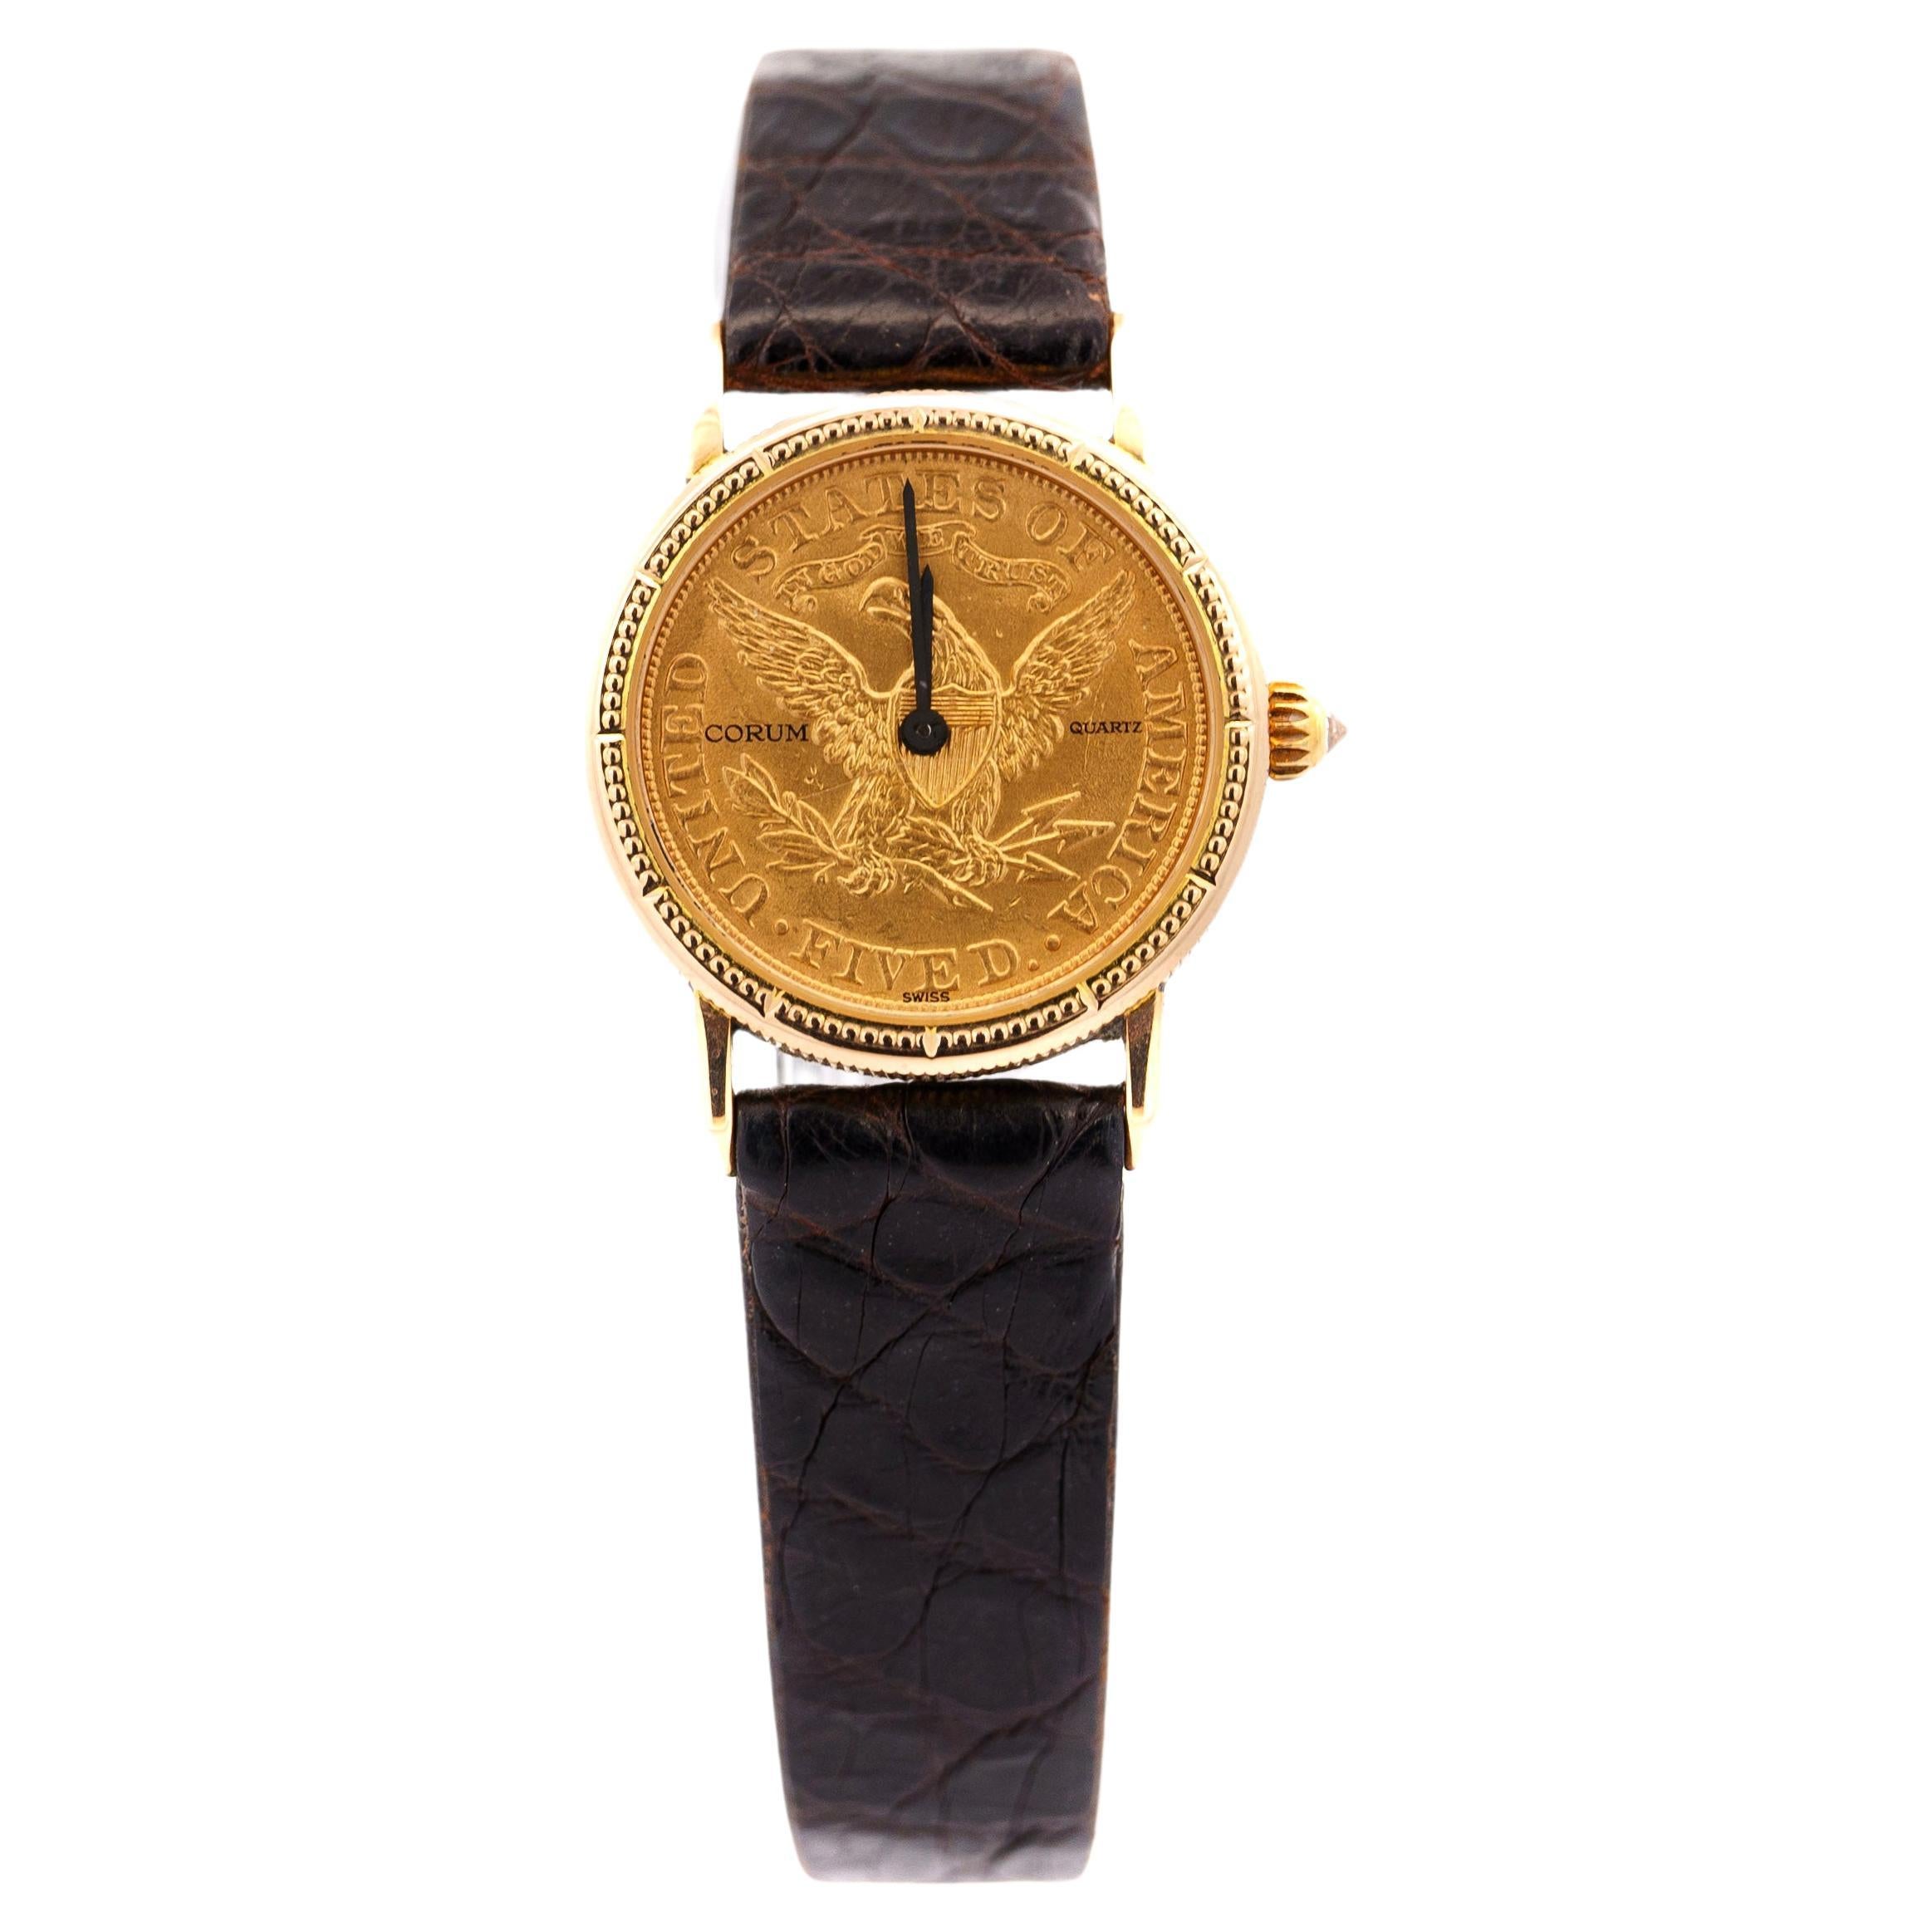 Vintage Corum Watch Circa 1970 With a 22K Year 1899 5 Dollar Gold Coin. 24mm dial with textured 18k gold case, quartz movement, 4.5mm thickness, and original Corum watch box and box case. A gorgeous masterpiece of luxury timepieces and historic